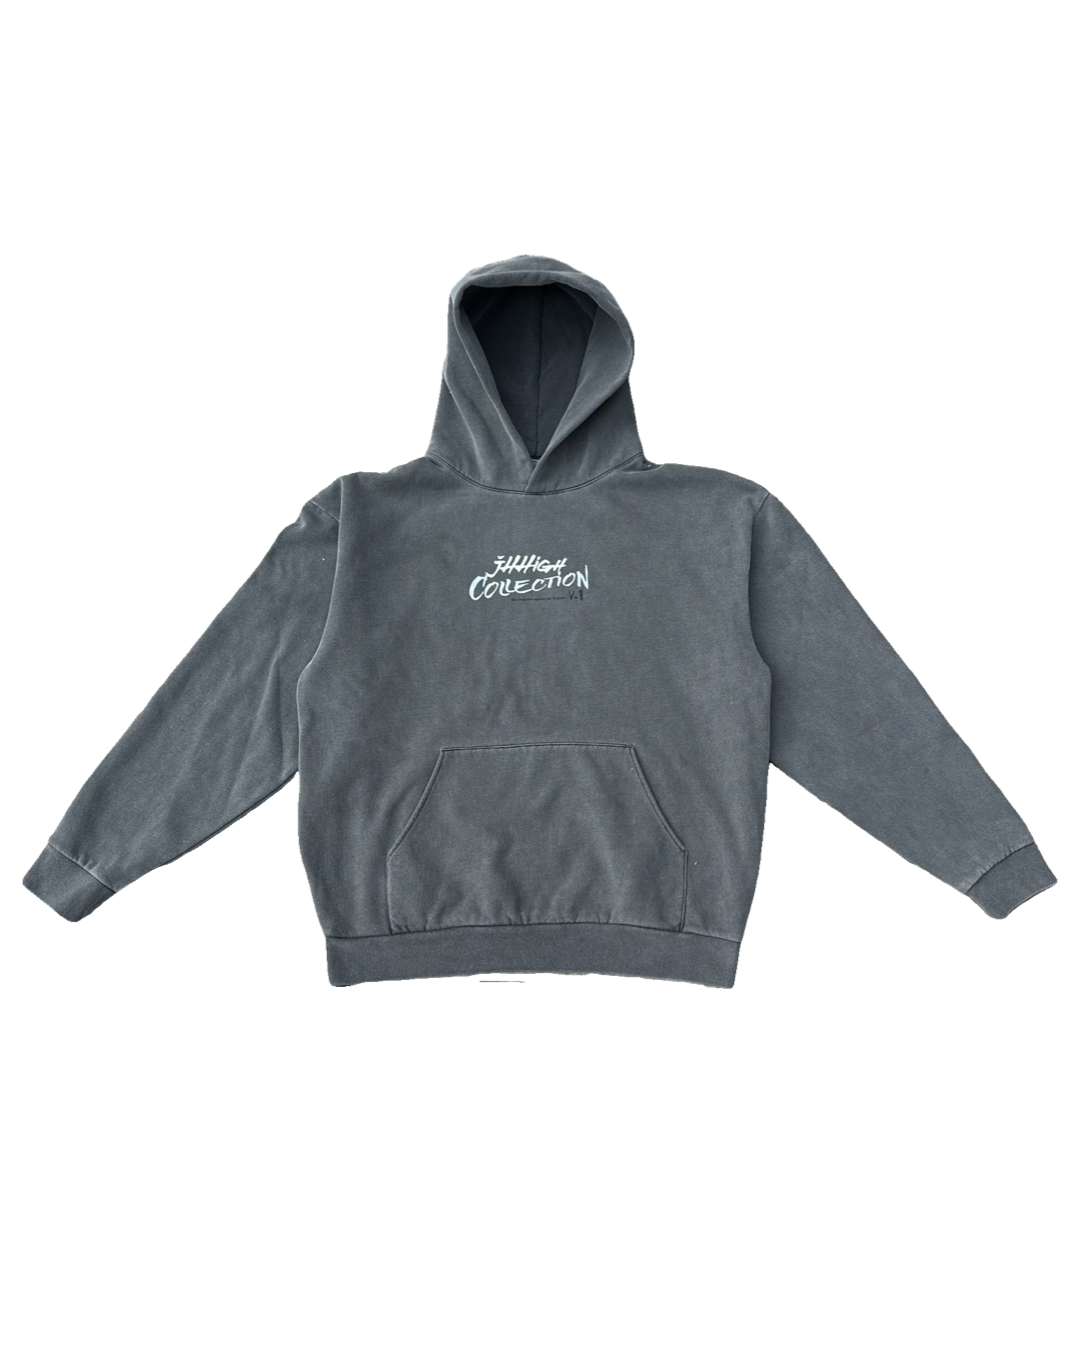 Black Hole Connections Hoodie